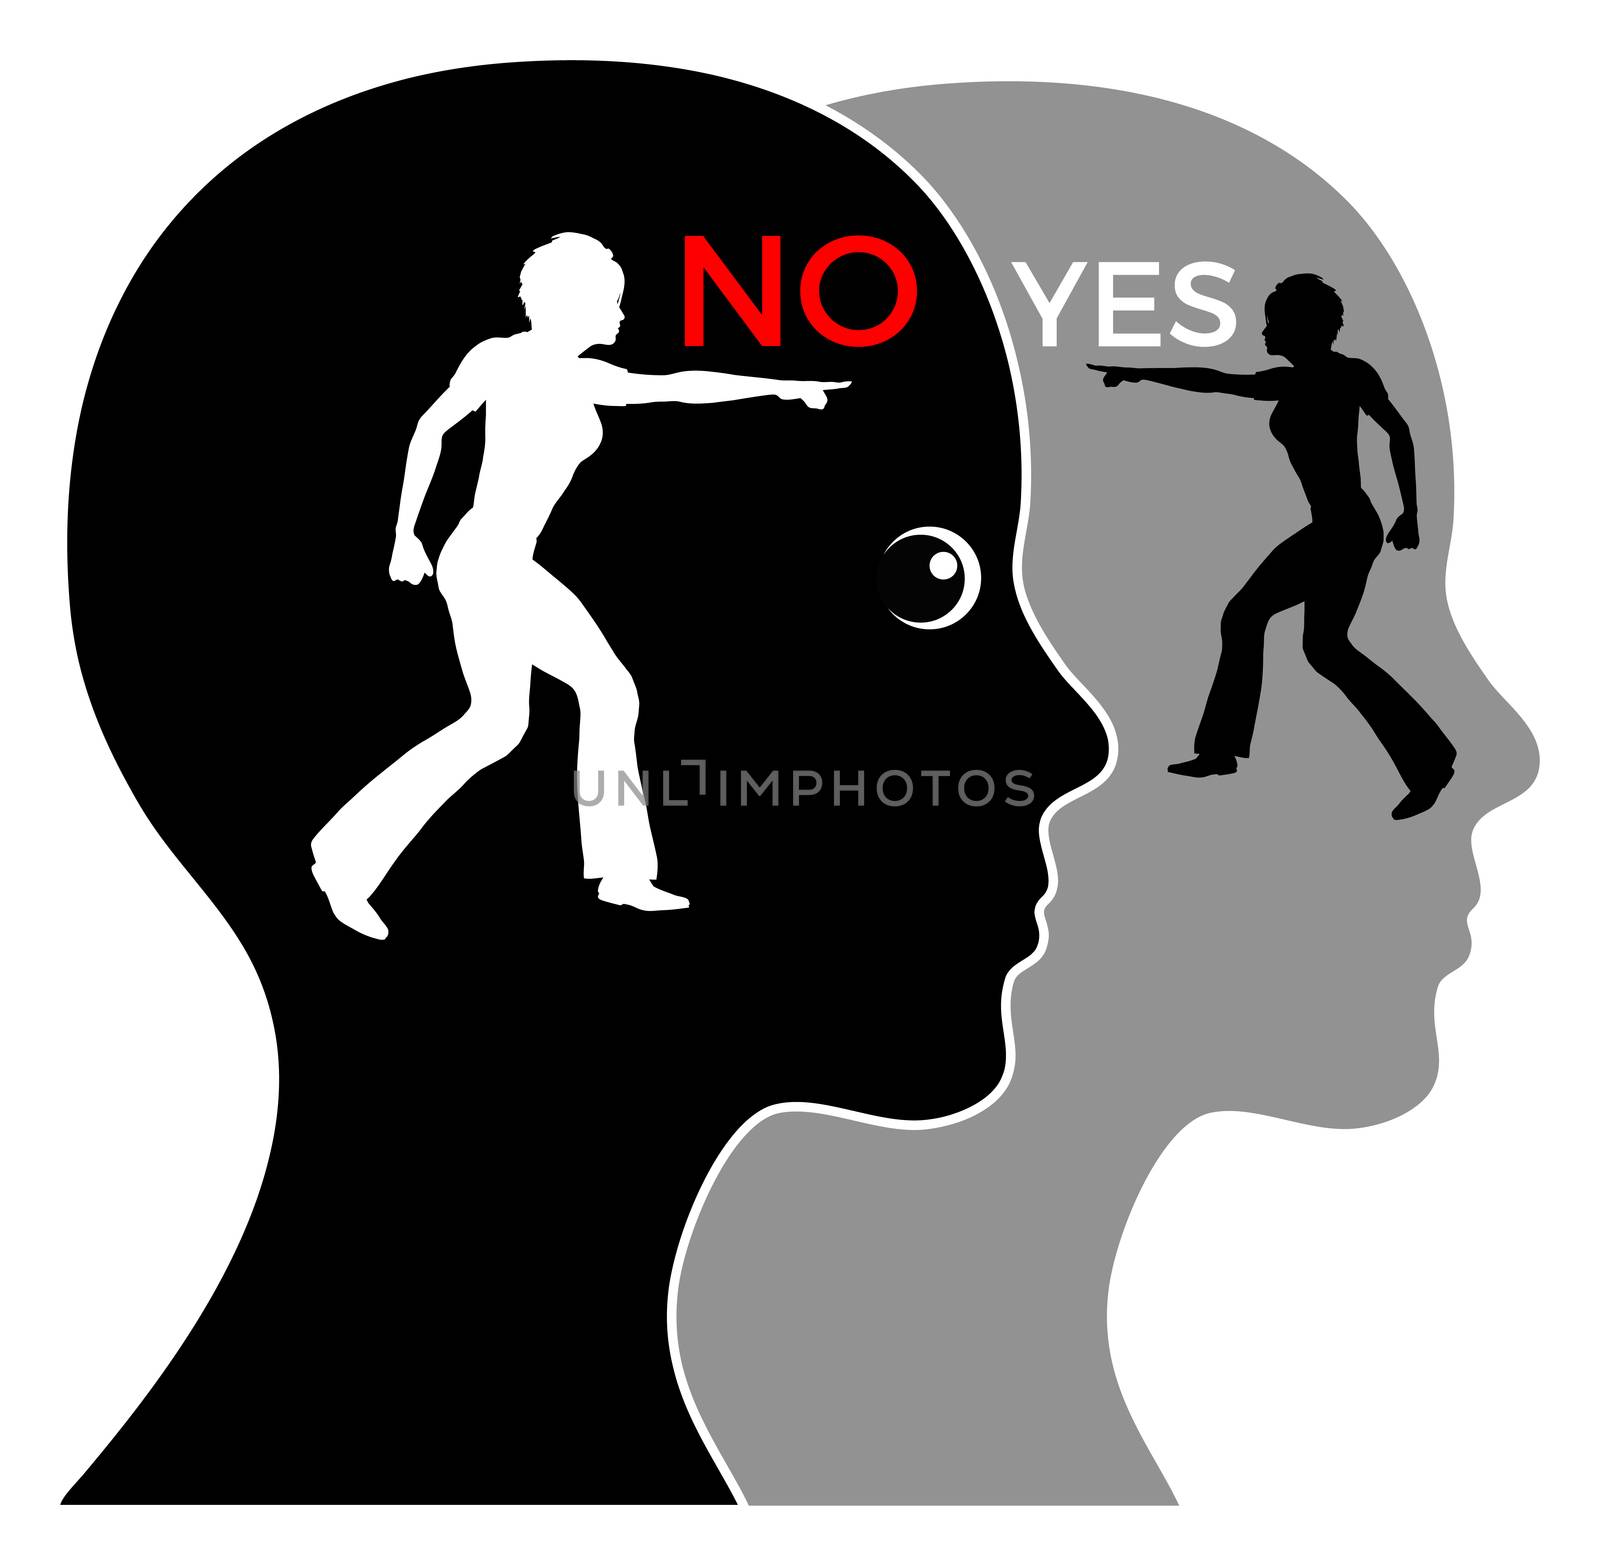 Consciousness versus unconsciousness, making complicated decisions, yes or no